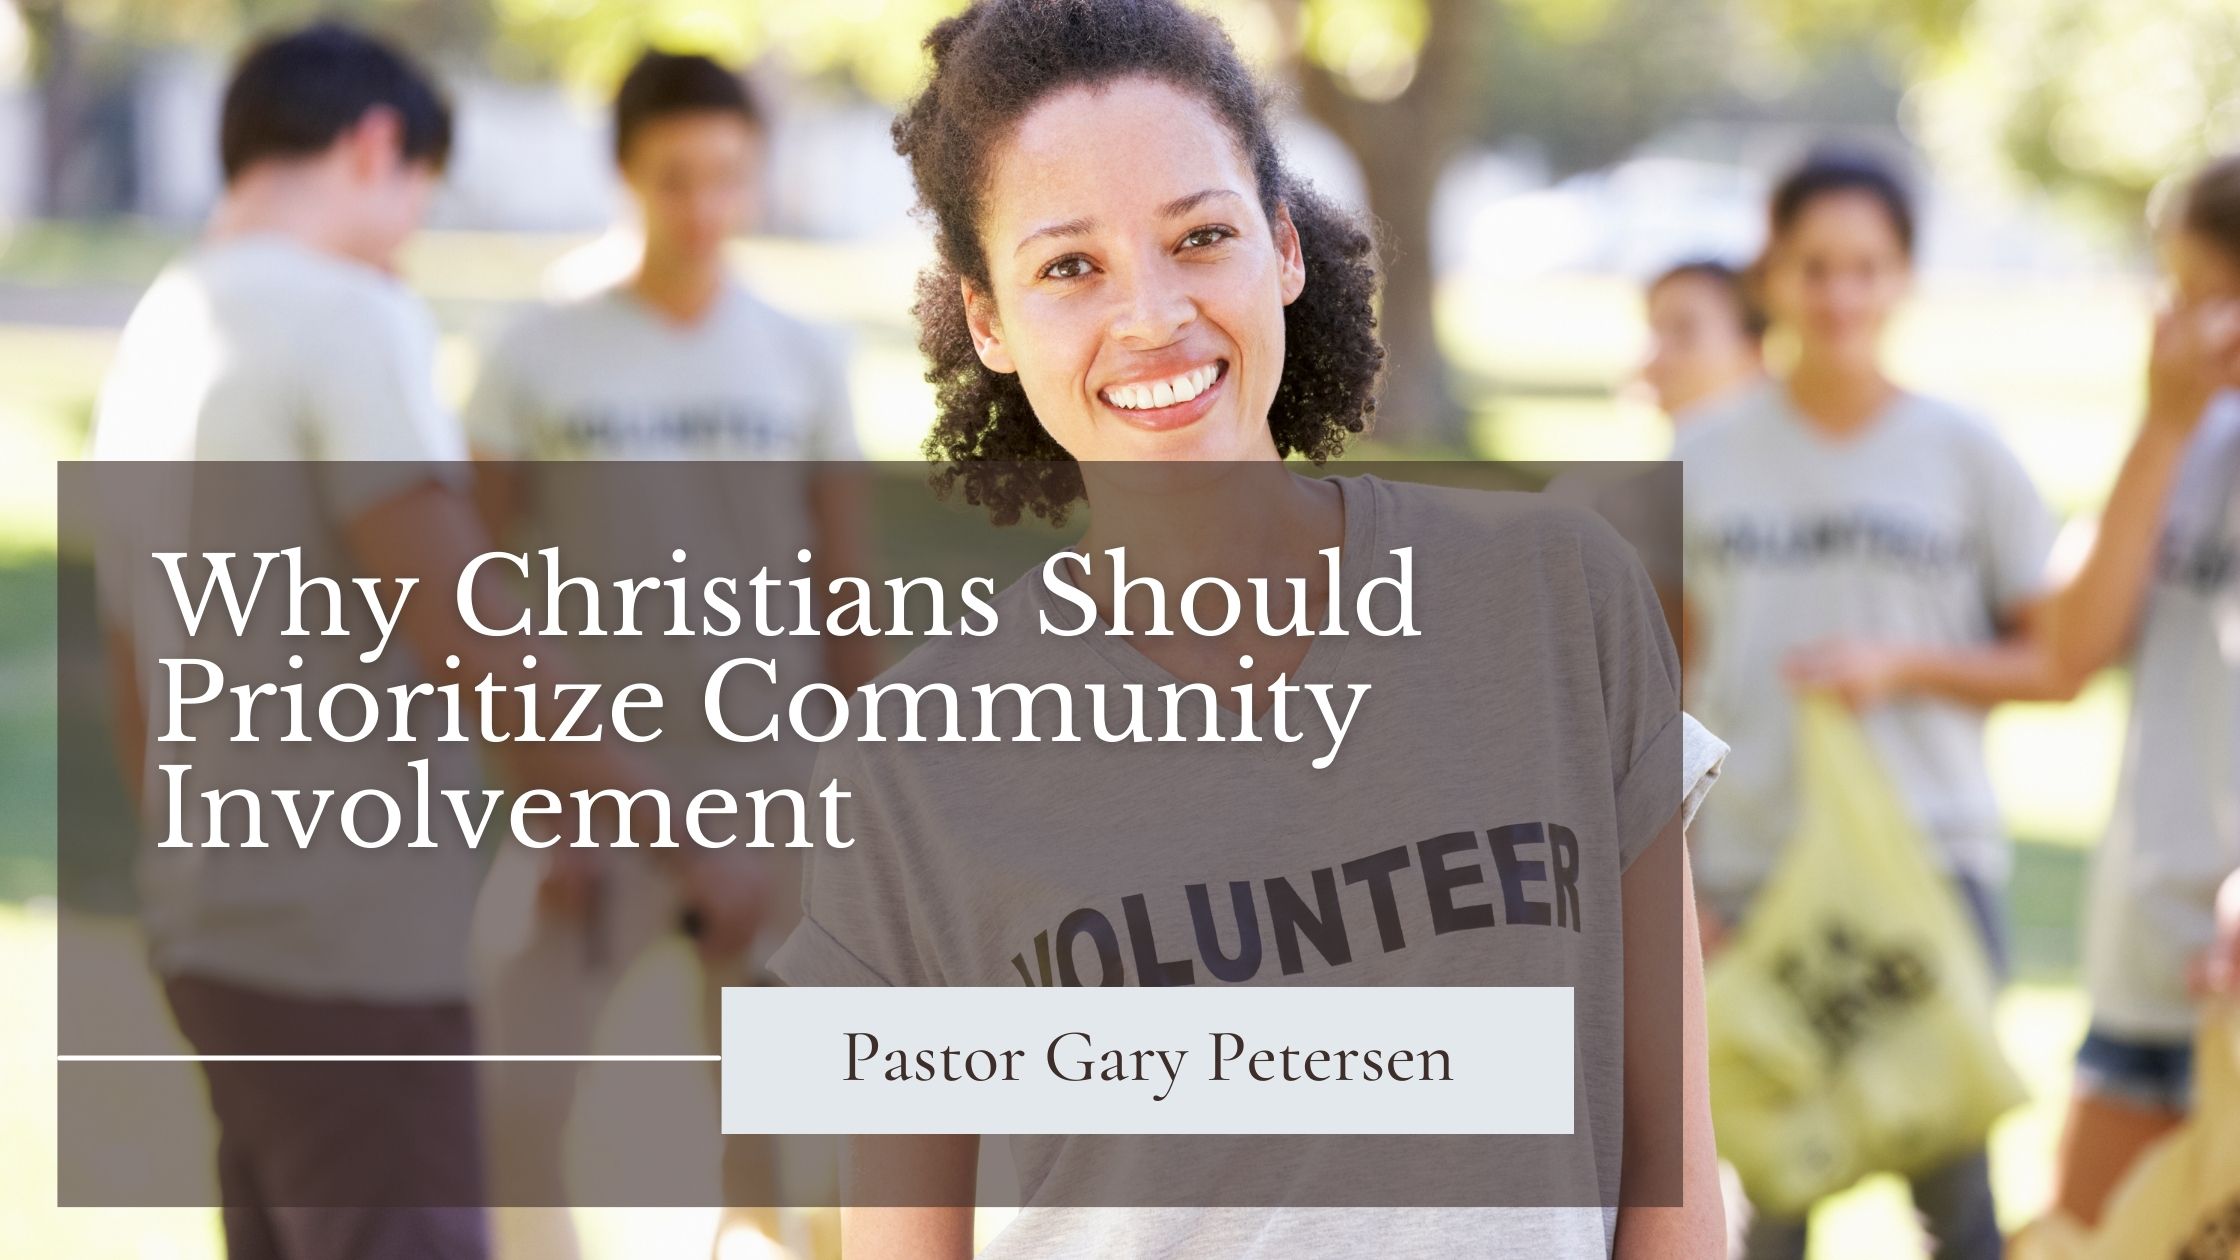 Why Christians Should Prioritize Community Involvement